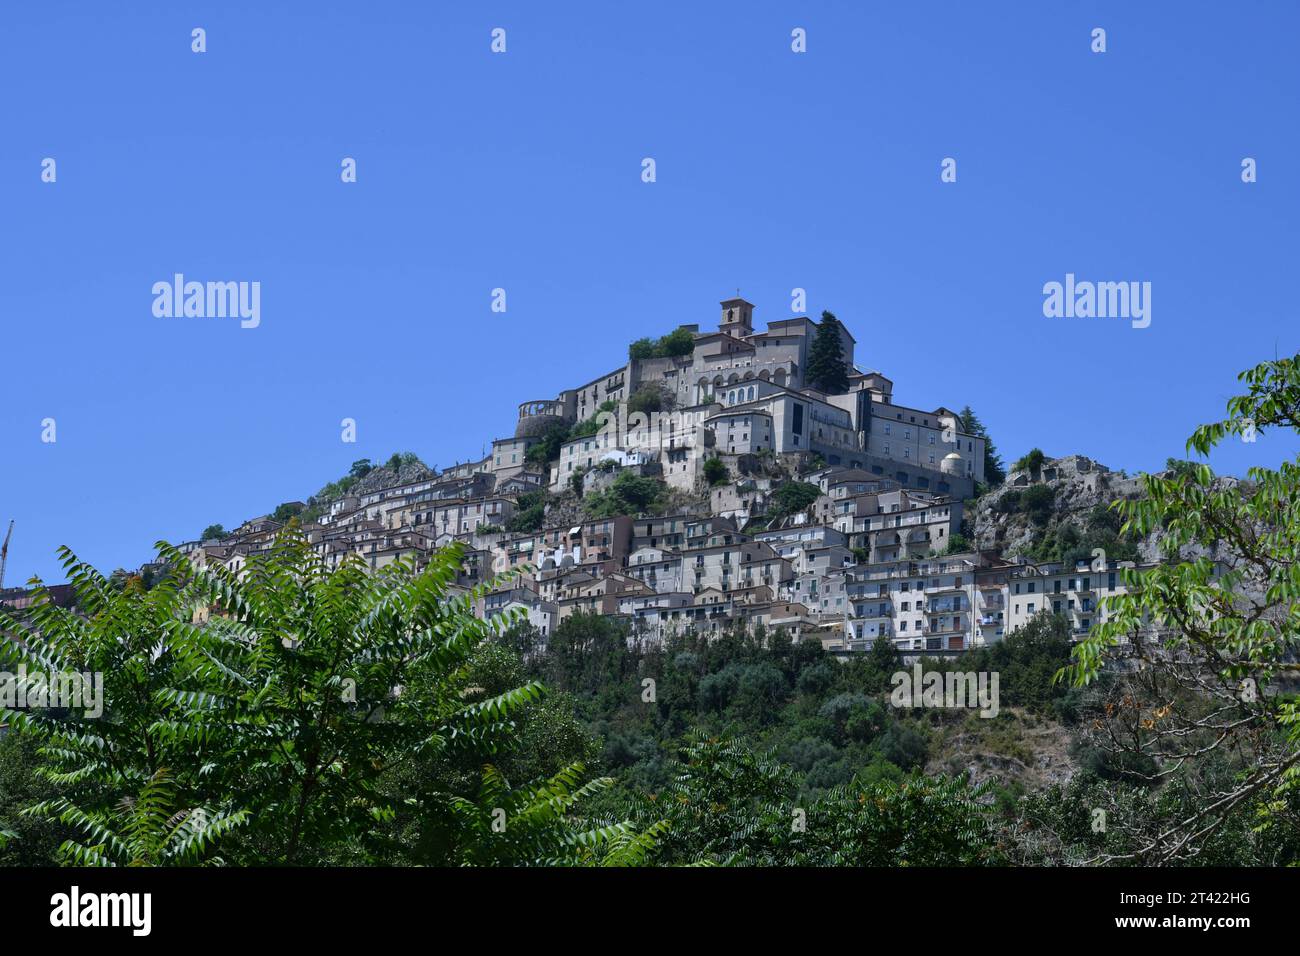 View of an old village in the mountains of Basilicata region. Stock Photo